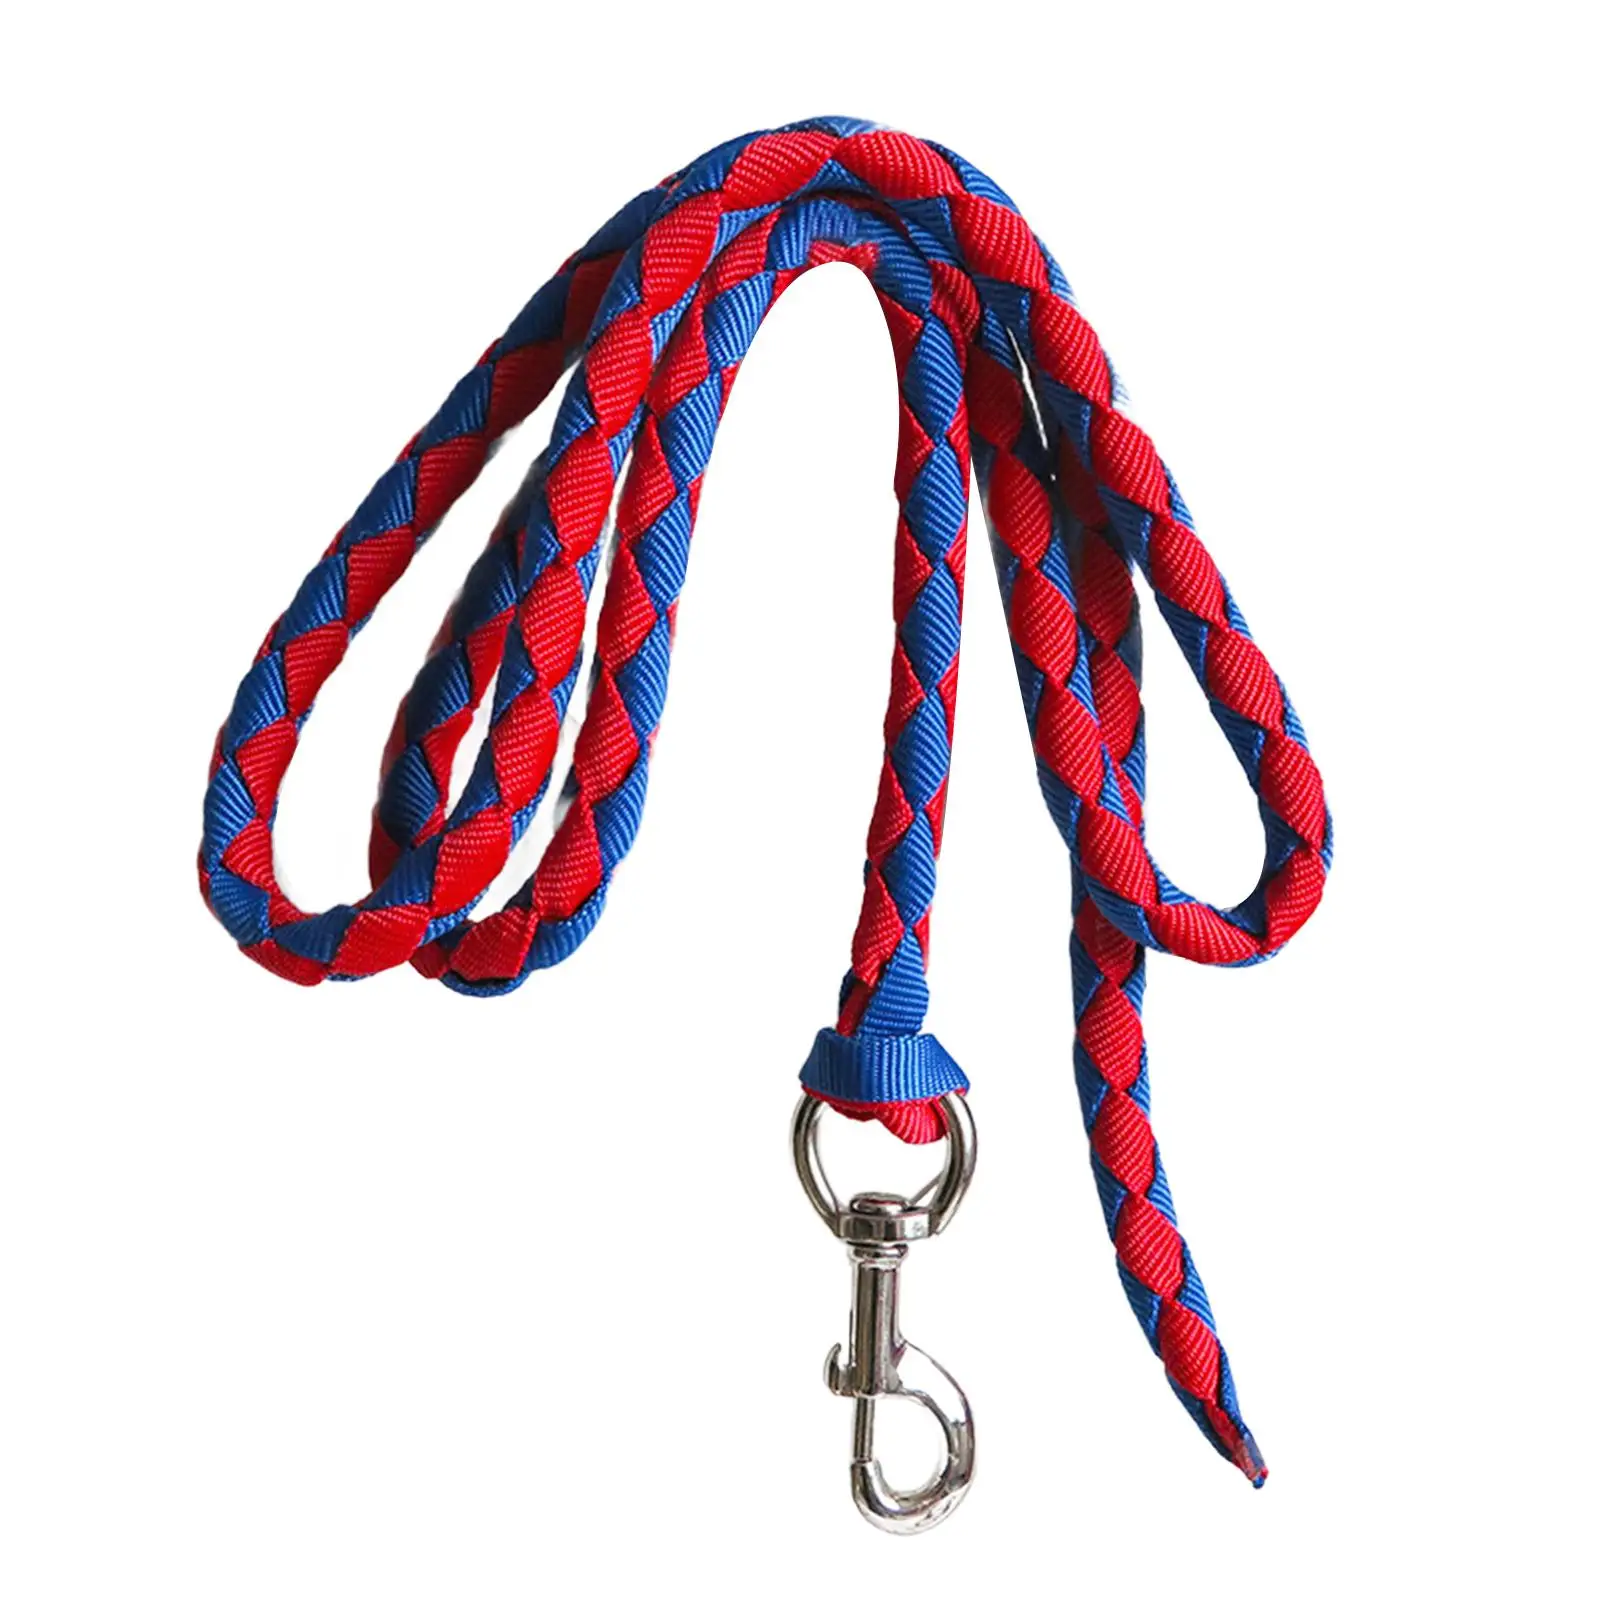 Horse Lead Rope Sturdy Halter Rope for Leading Training Horse, Dog, or Sheep